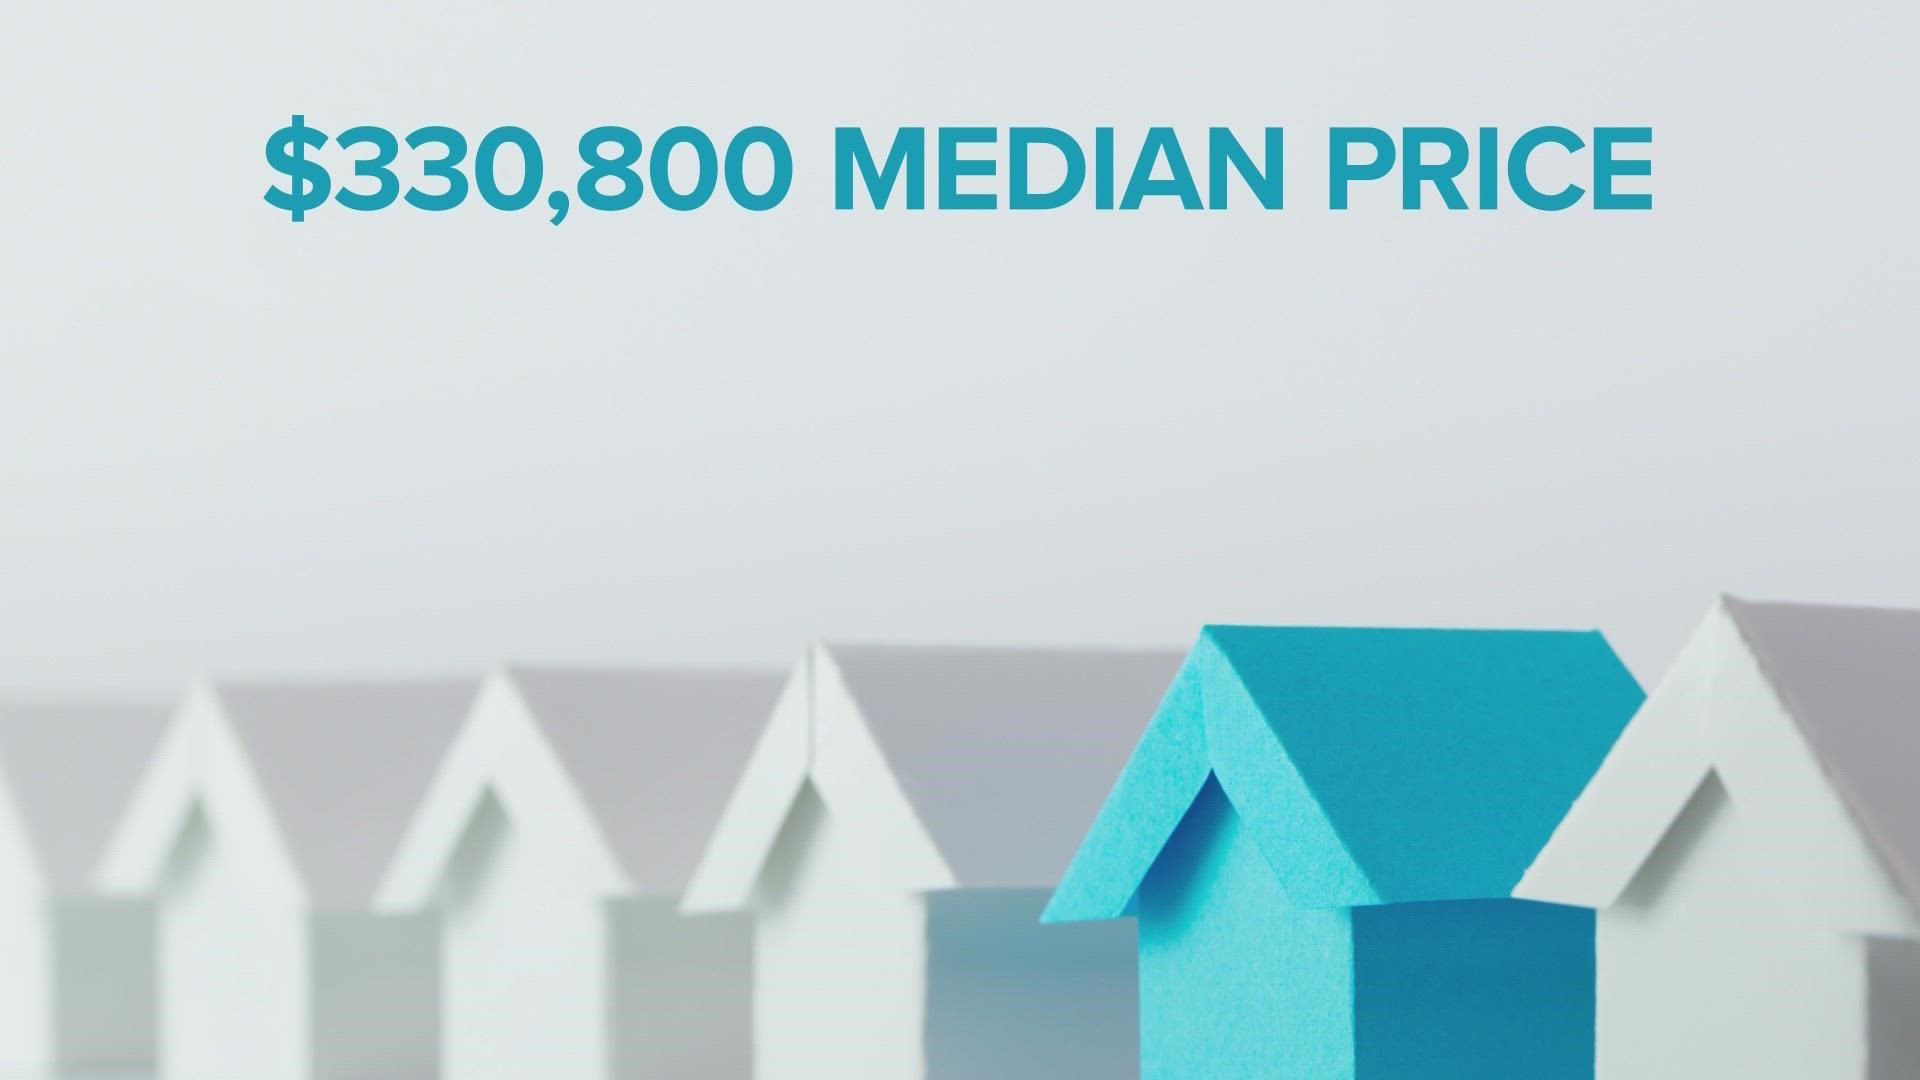 The HAR report shows that the current median-priced home in Houston is $330,800, meaning an annual salary of $73,600 is needed to afford housing.